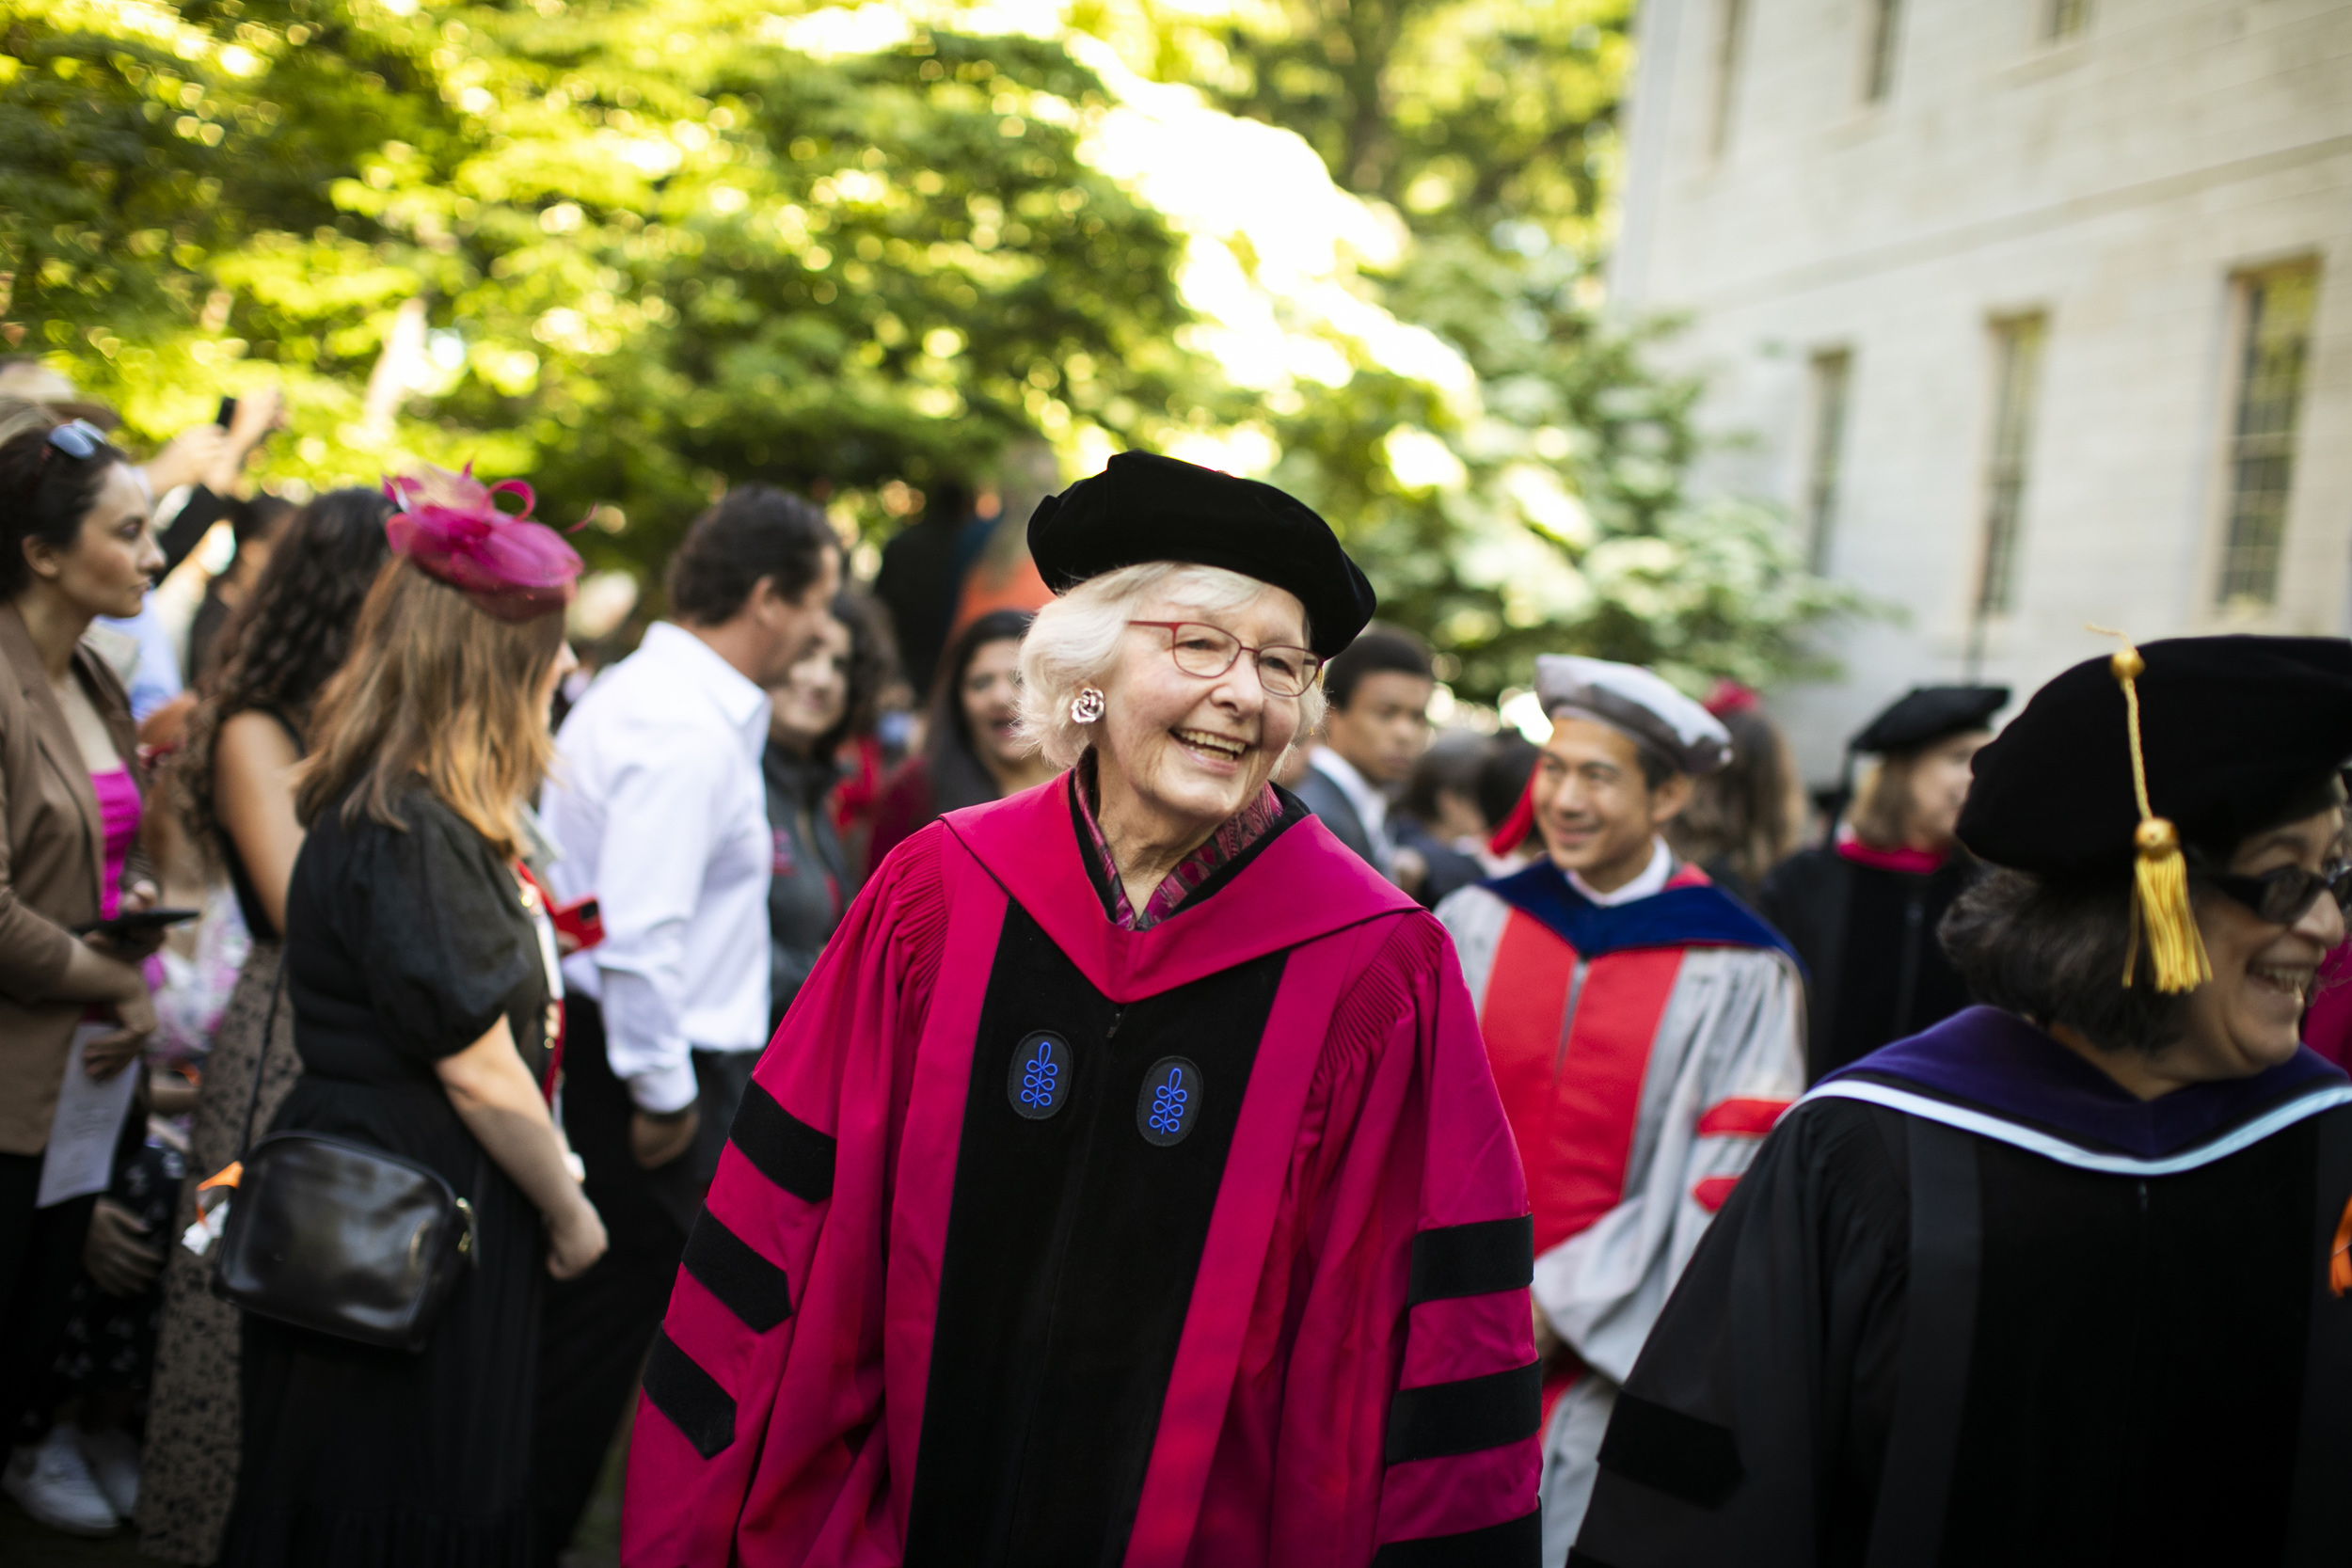 Honorary degree recipient Margaret Marshall is pictured during the procession.